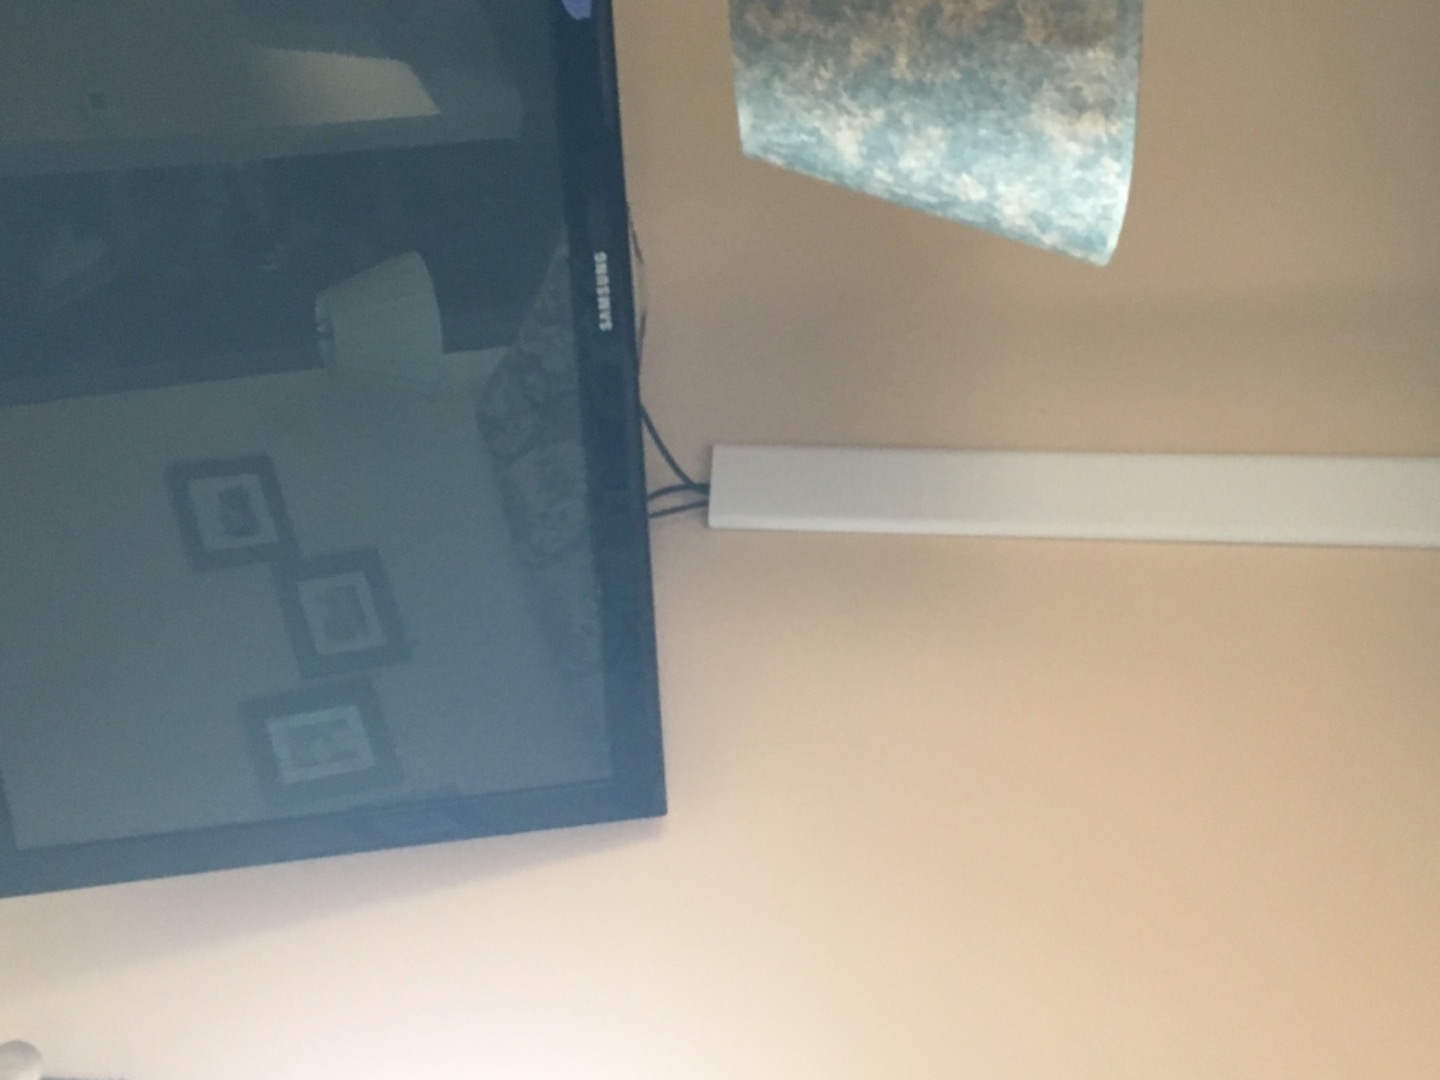 Wiremold: How to hide flat screen TV cables on the wall 